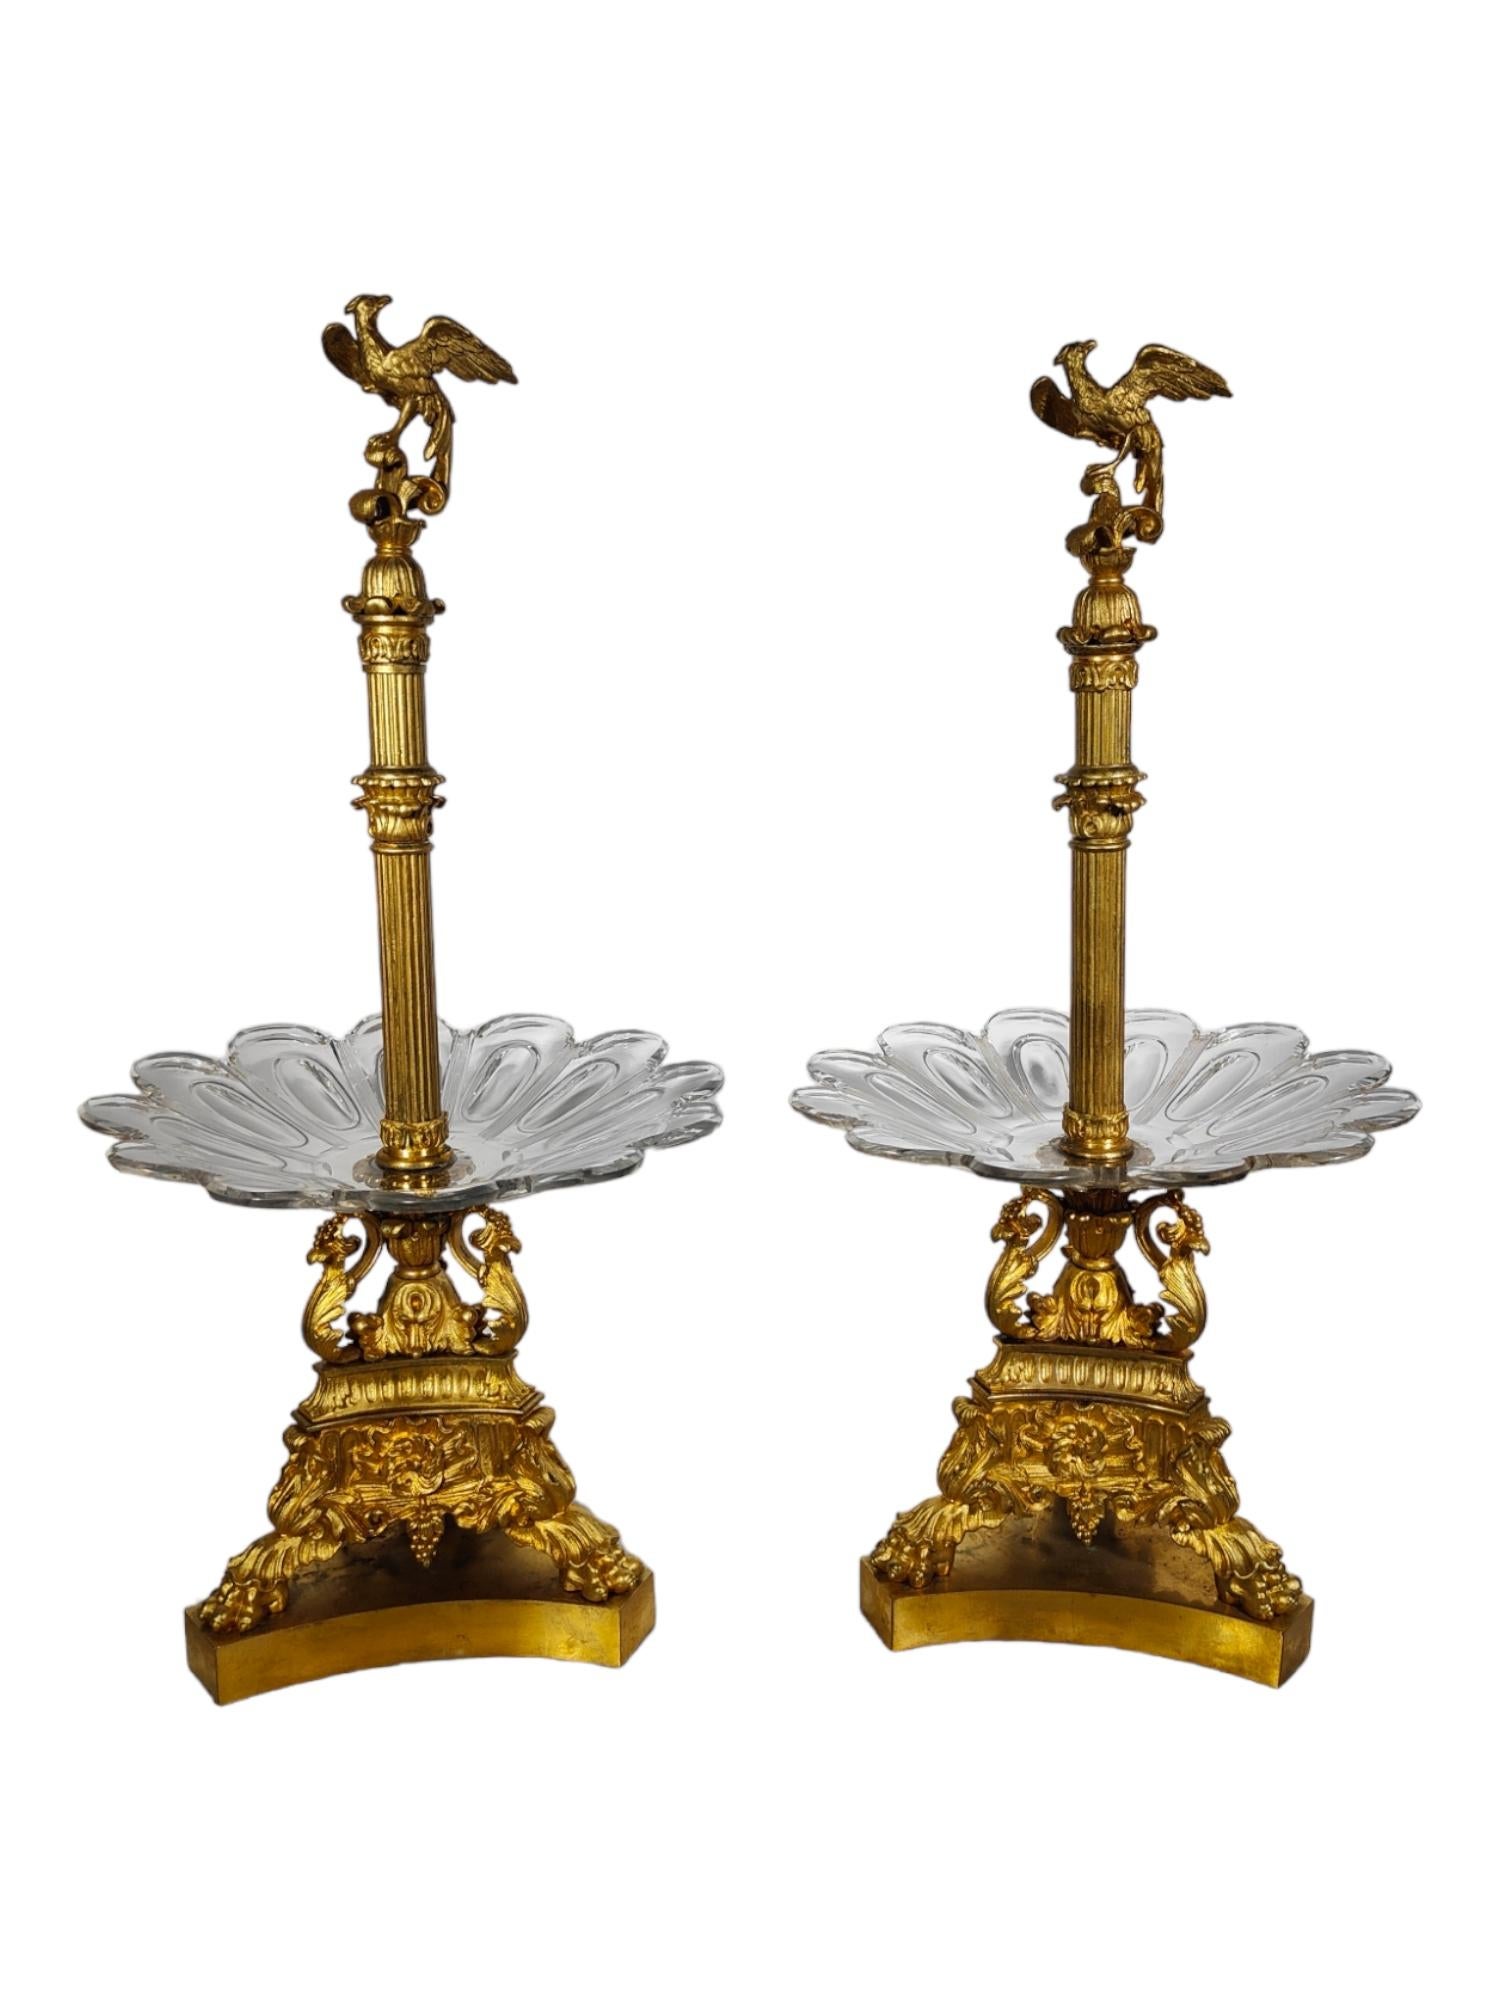 Elegant pair of molded and frosted glass fruit risers with central rod in gilded bronze, beautiful Italian manufacture from the first half of the 19th century. Measures: Height 53 cm and diameter 25 cm.